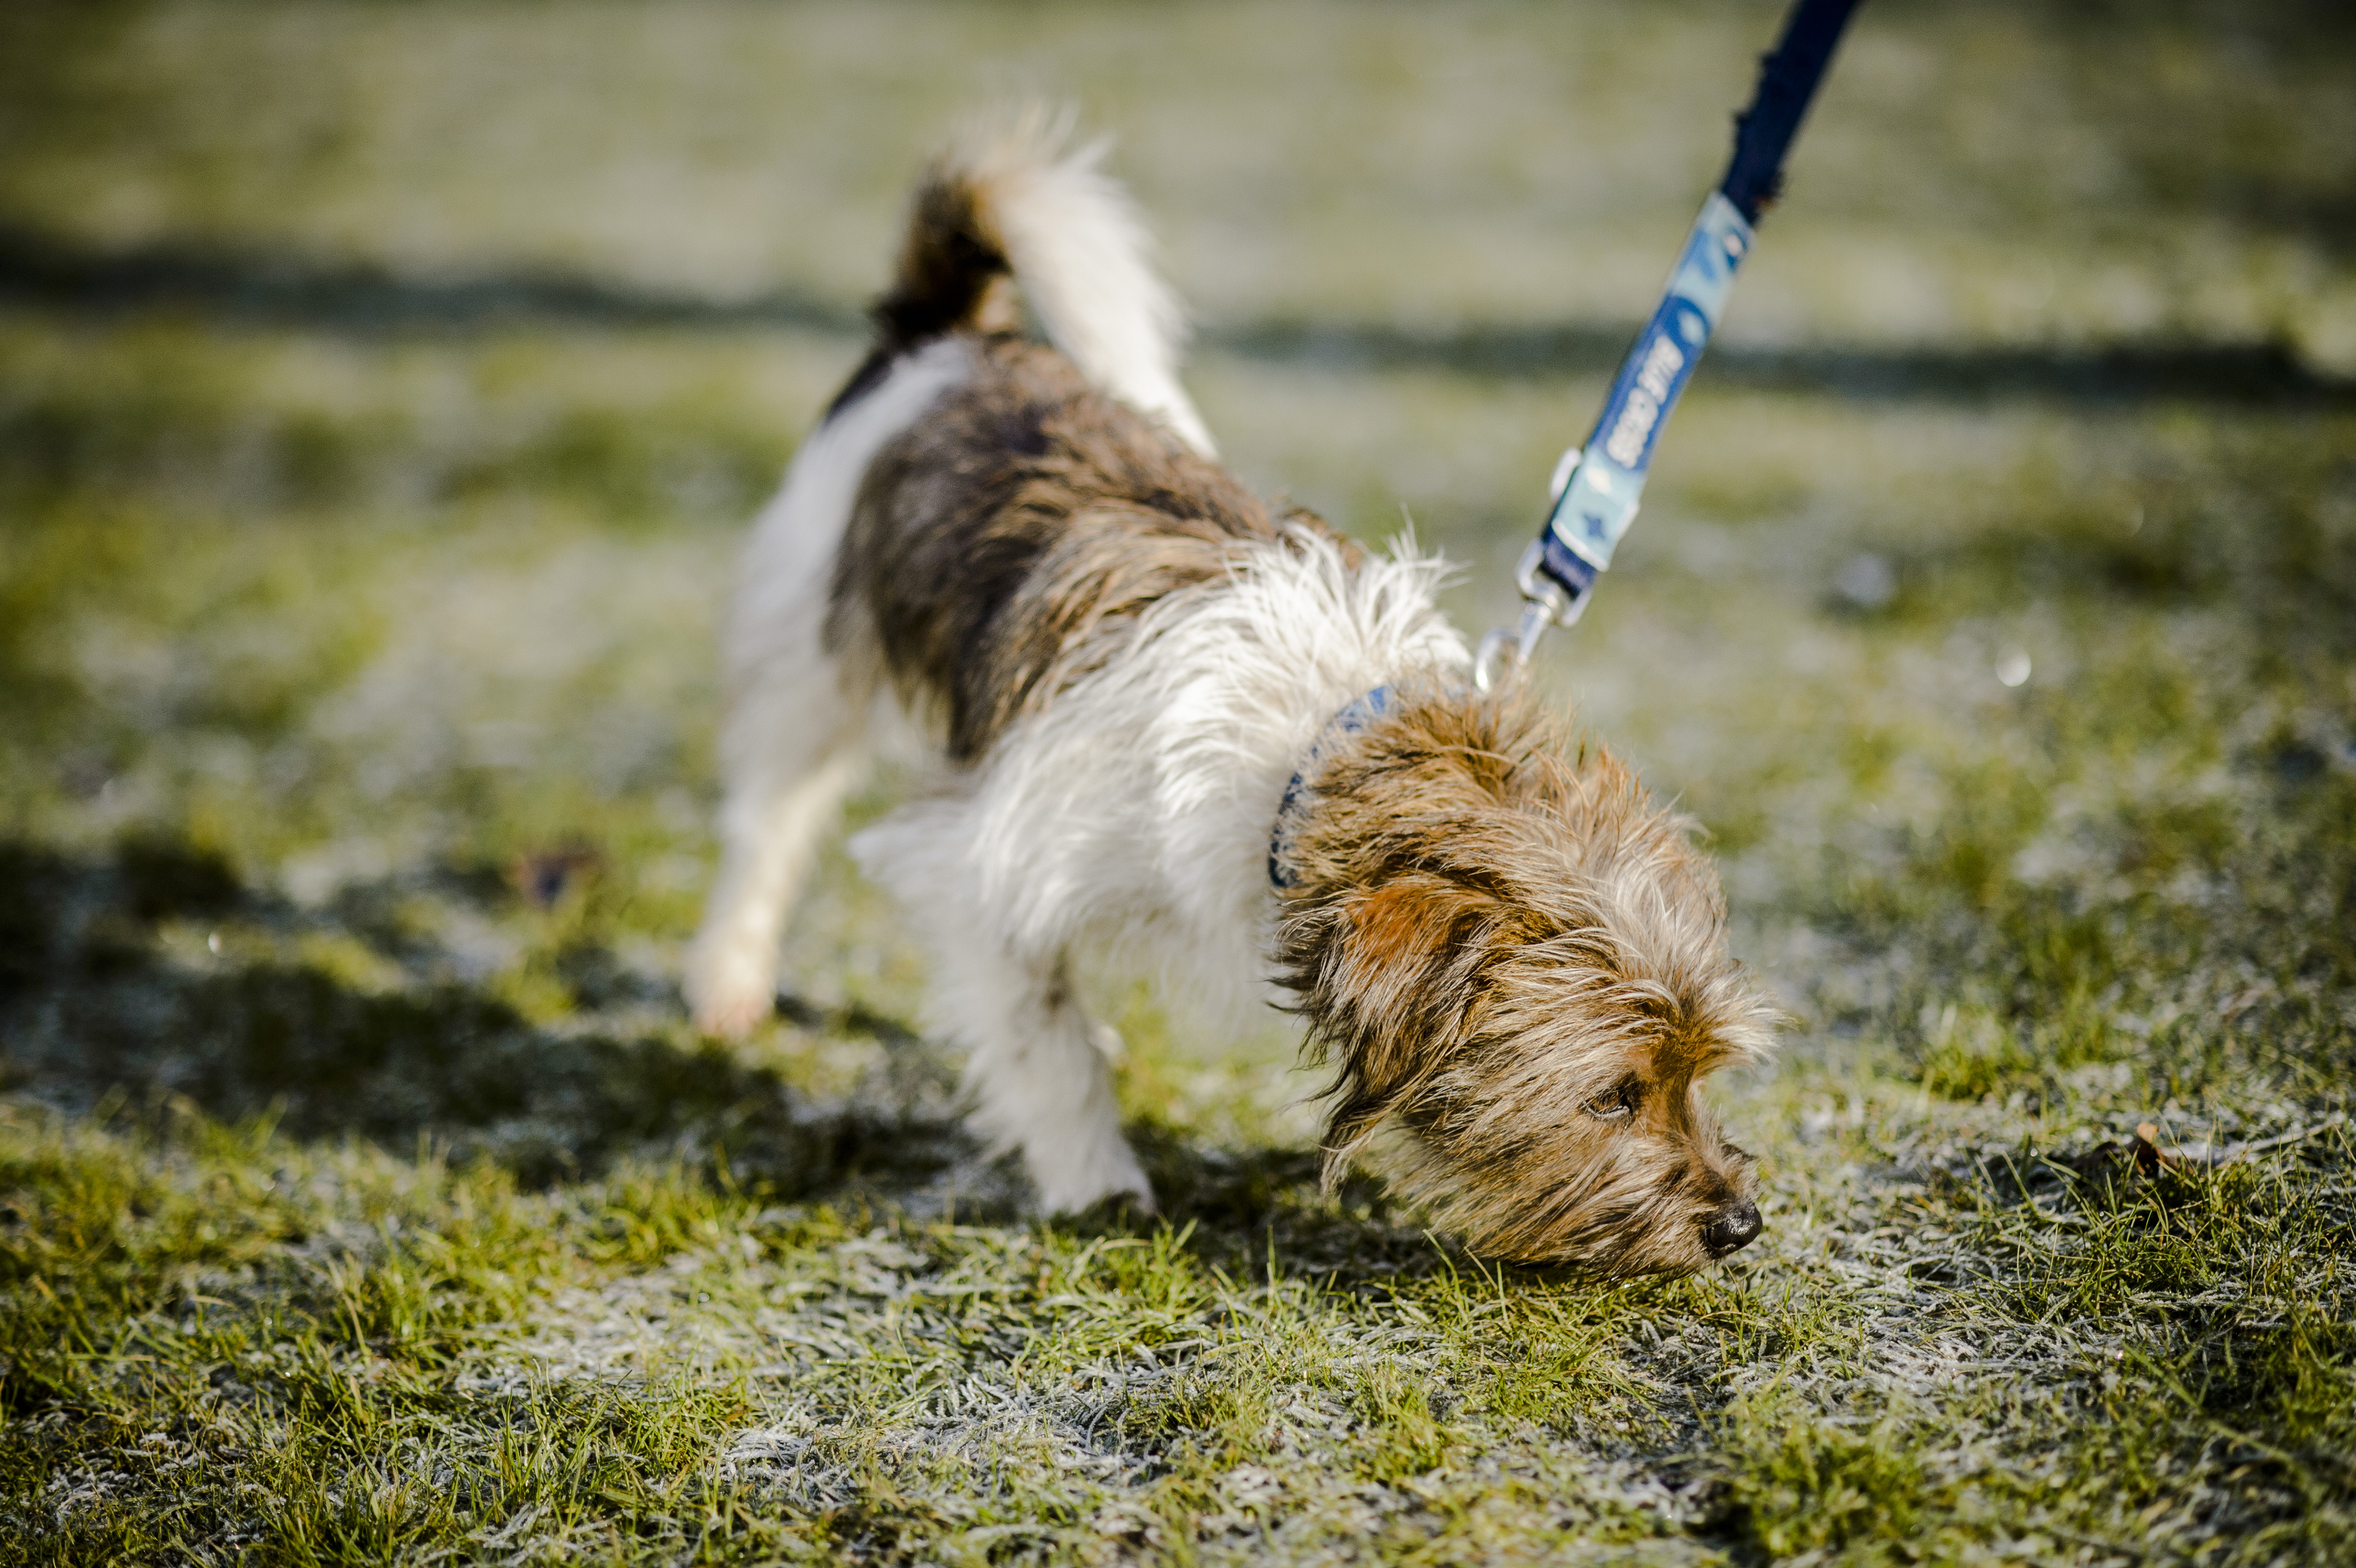 how to stop a dog eating other dogs poop